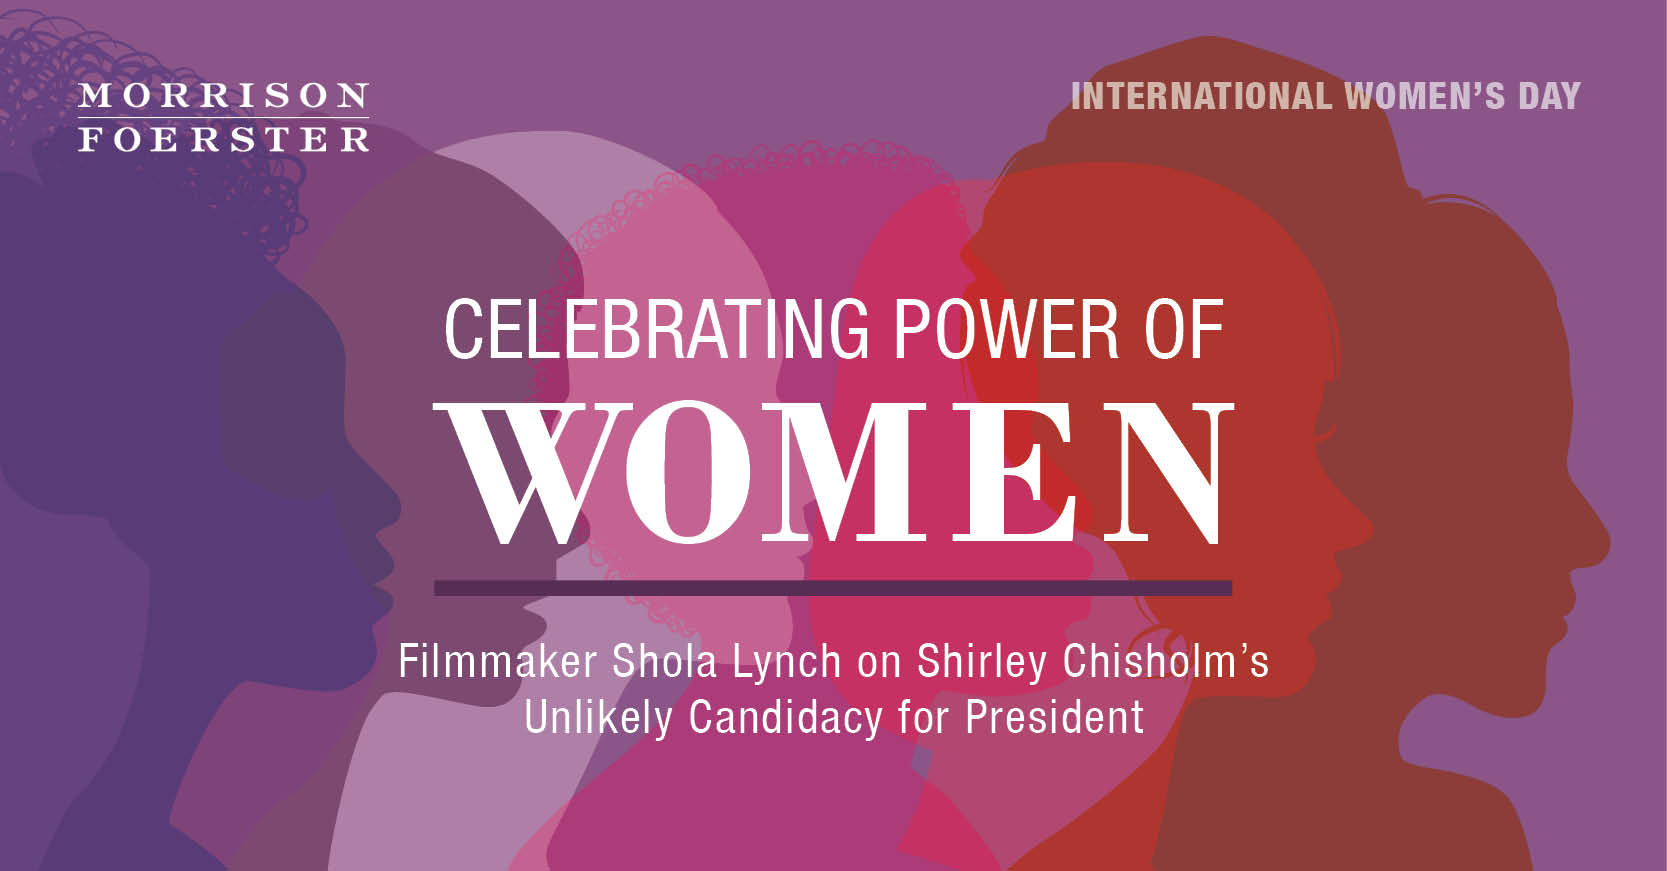 Celebrating the Power of Women: Filmmaker Shola Lynch on Shirley Chisholm’s Unlikely Candidacy for President